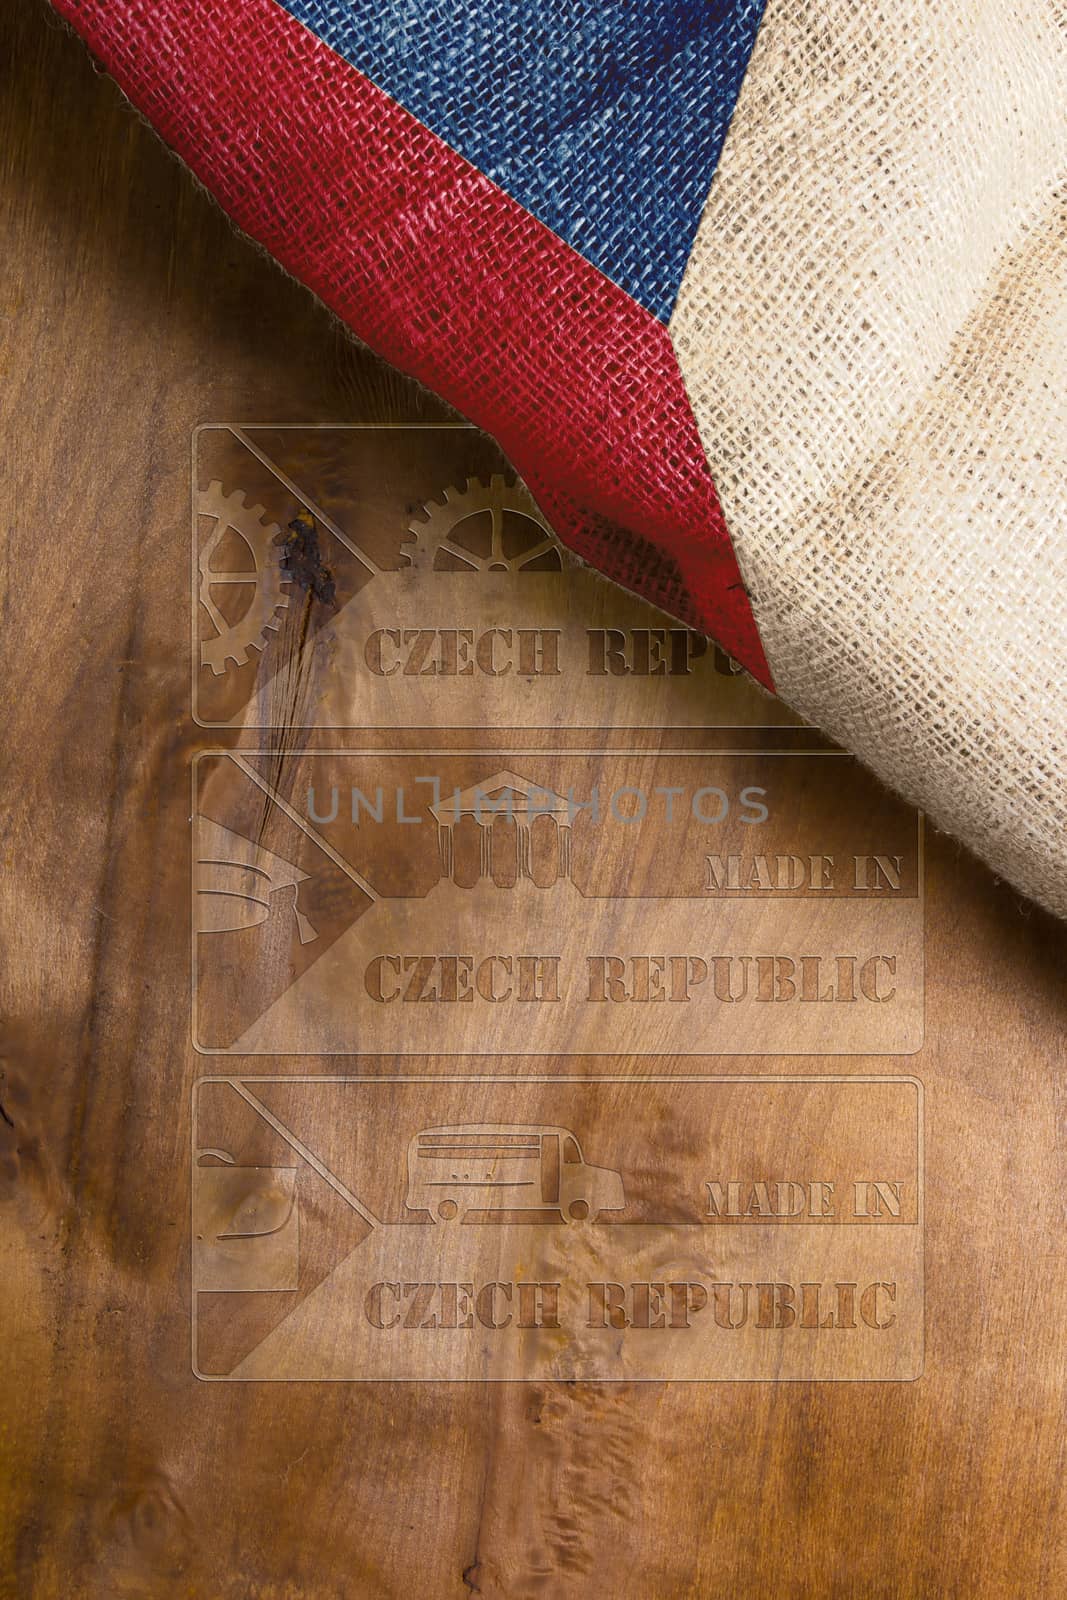 The state flag and a set of stamp made in the Czech Republic. Various industrial areas of the Czech Republic.